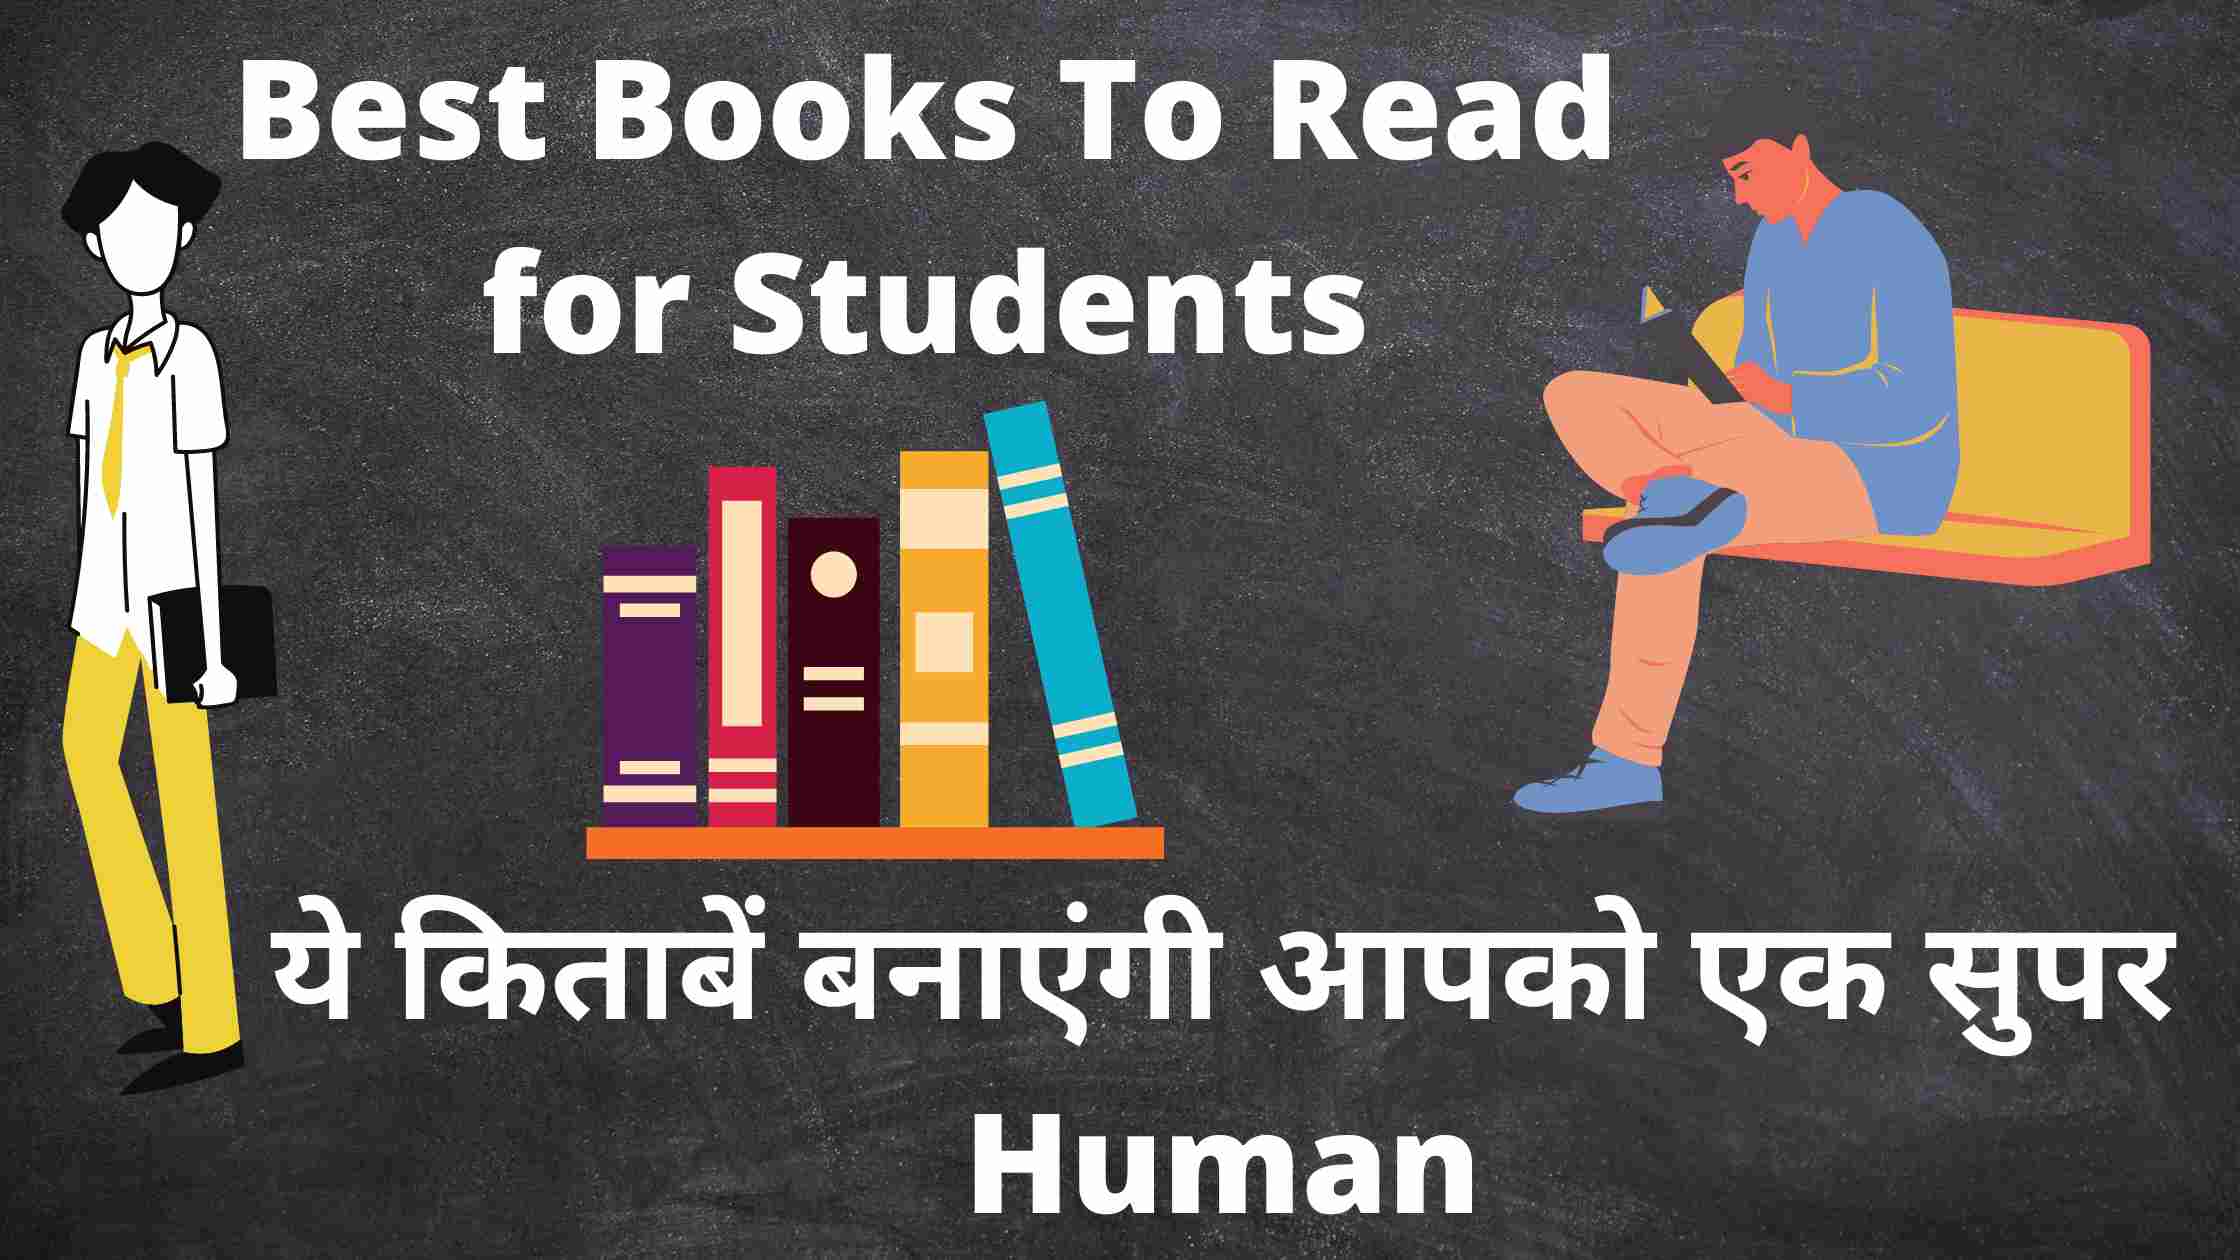 Best Books To Read for Students